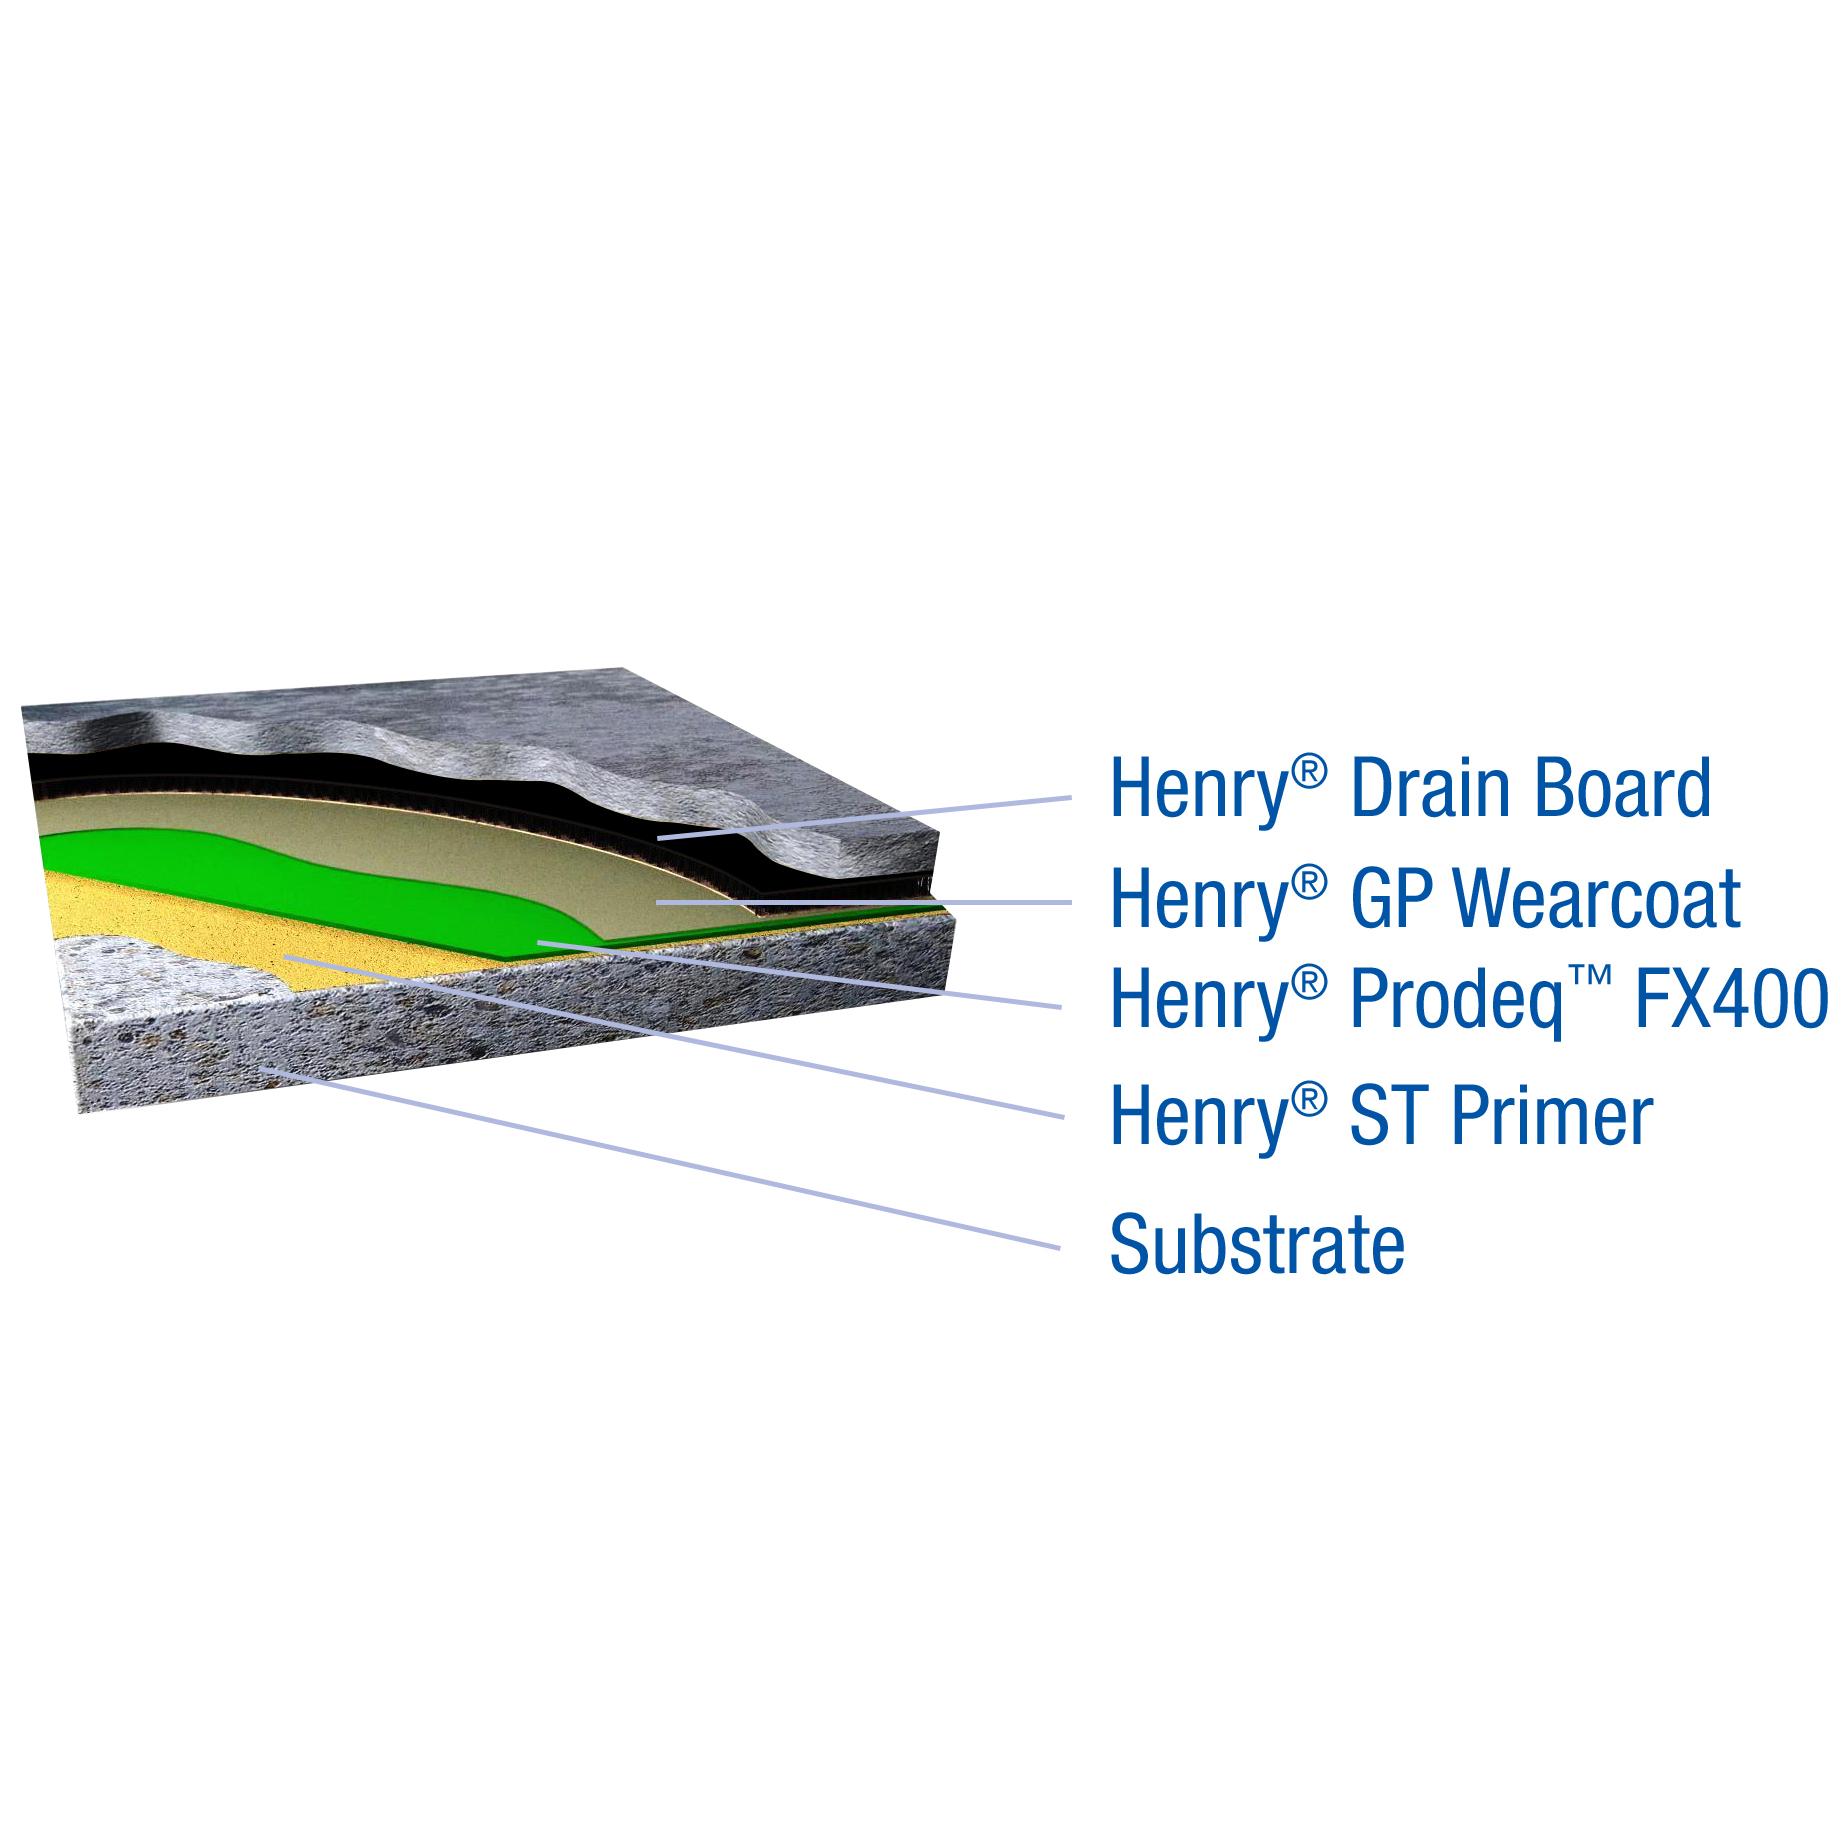 Henry® Prodeq™ concrete cutaway assembly 